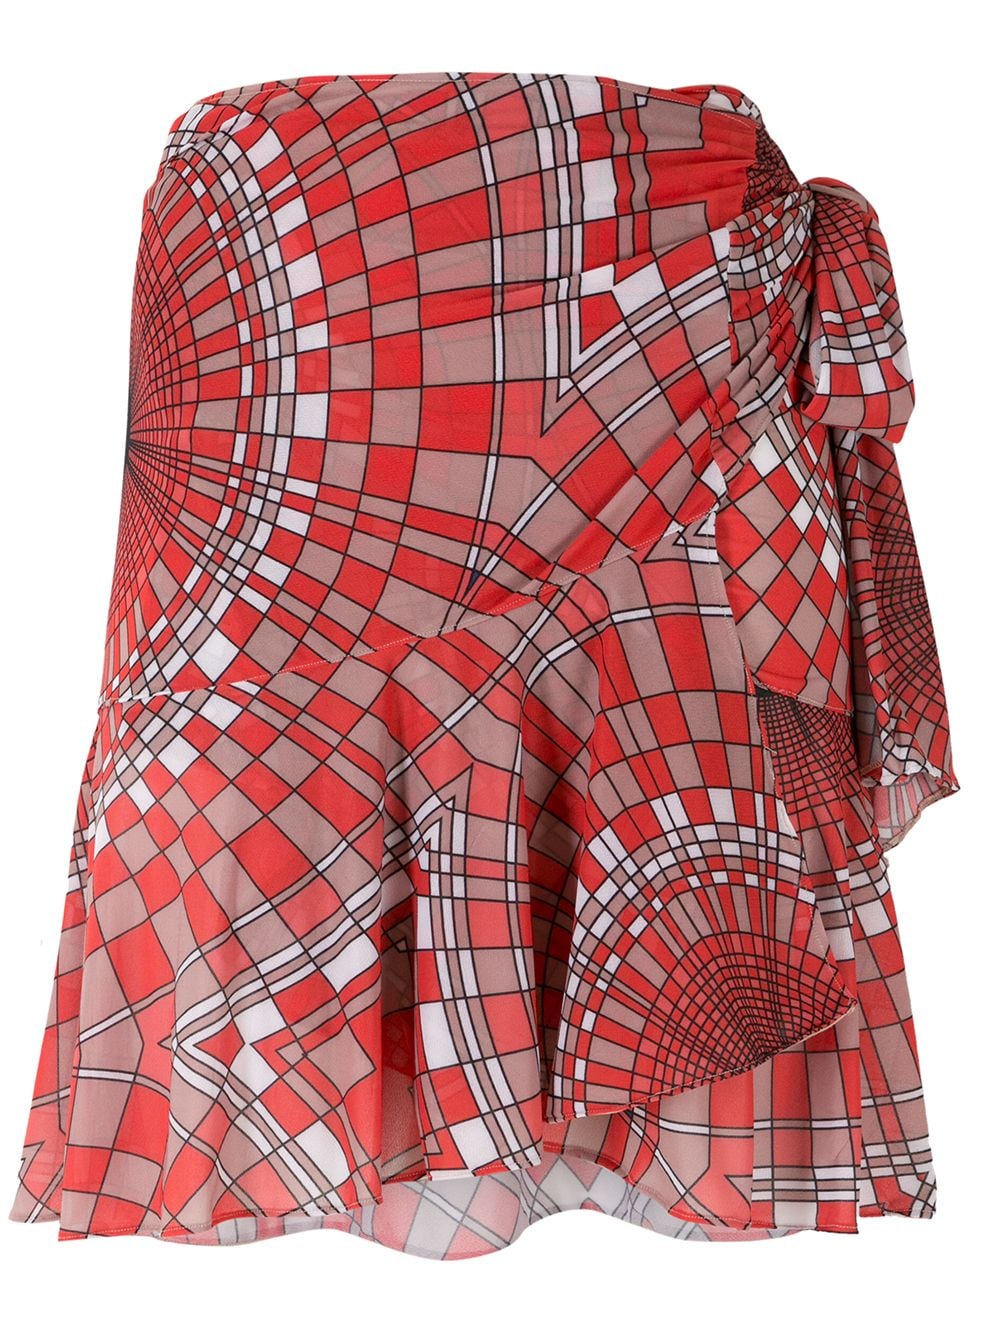 Amir Slama Printed Wrap Skirt With Panels In Red